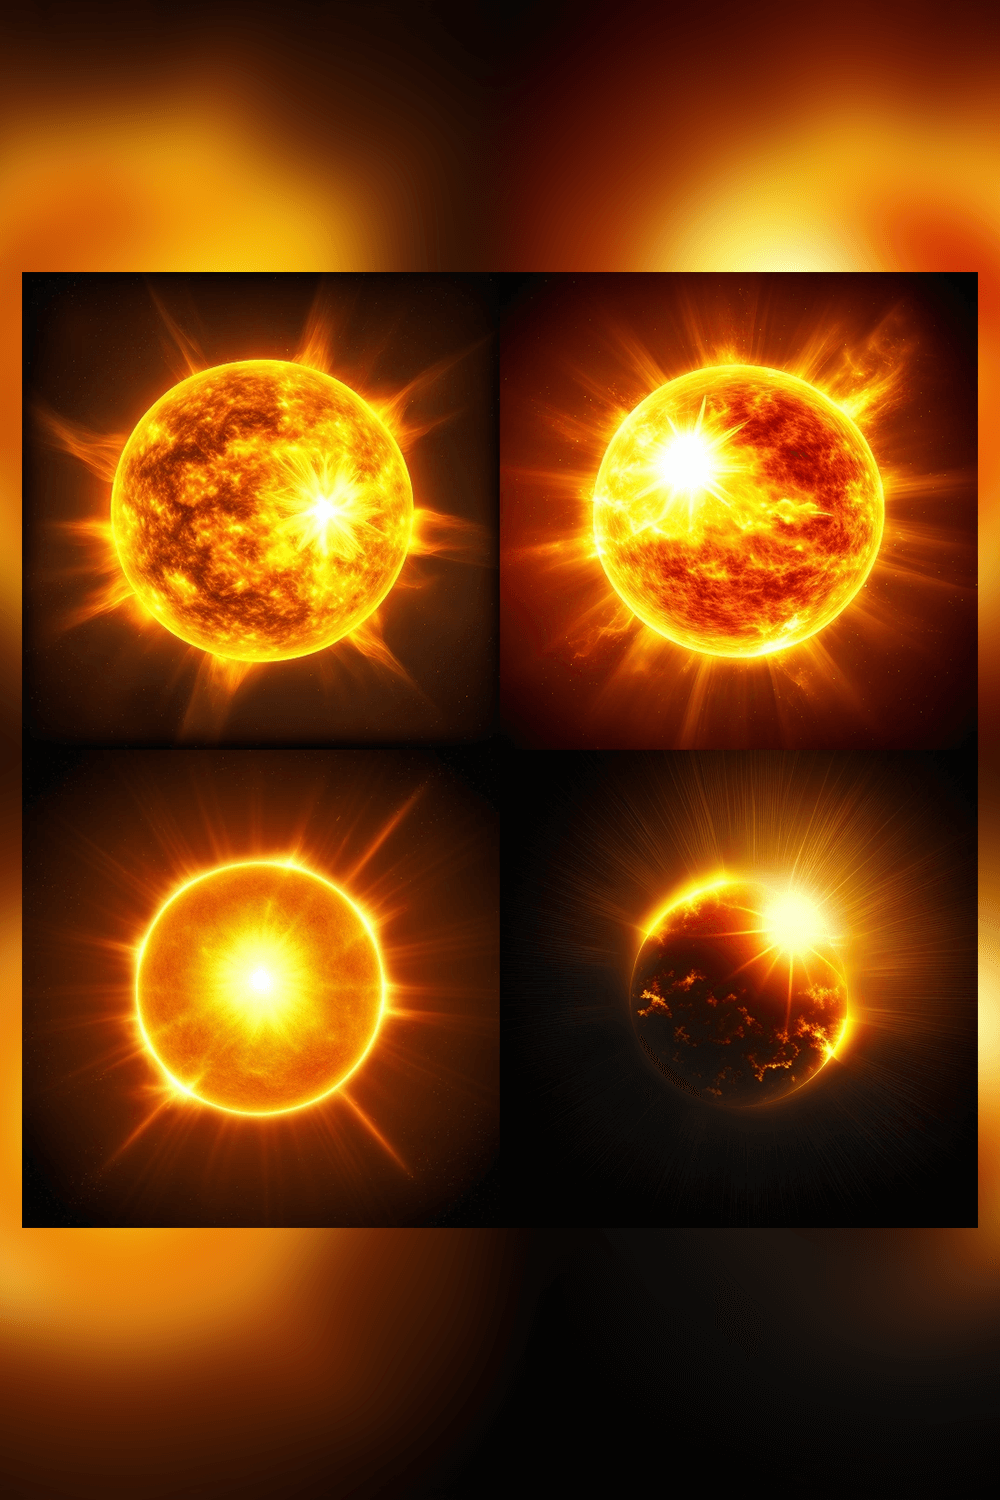 Four images of the sun in different positions.